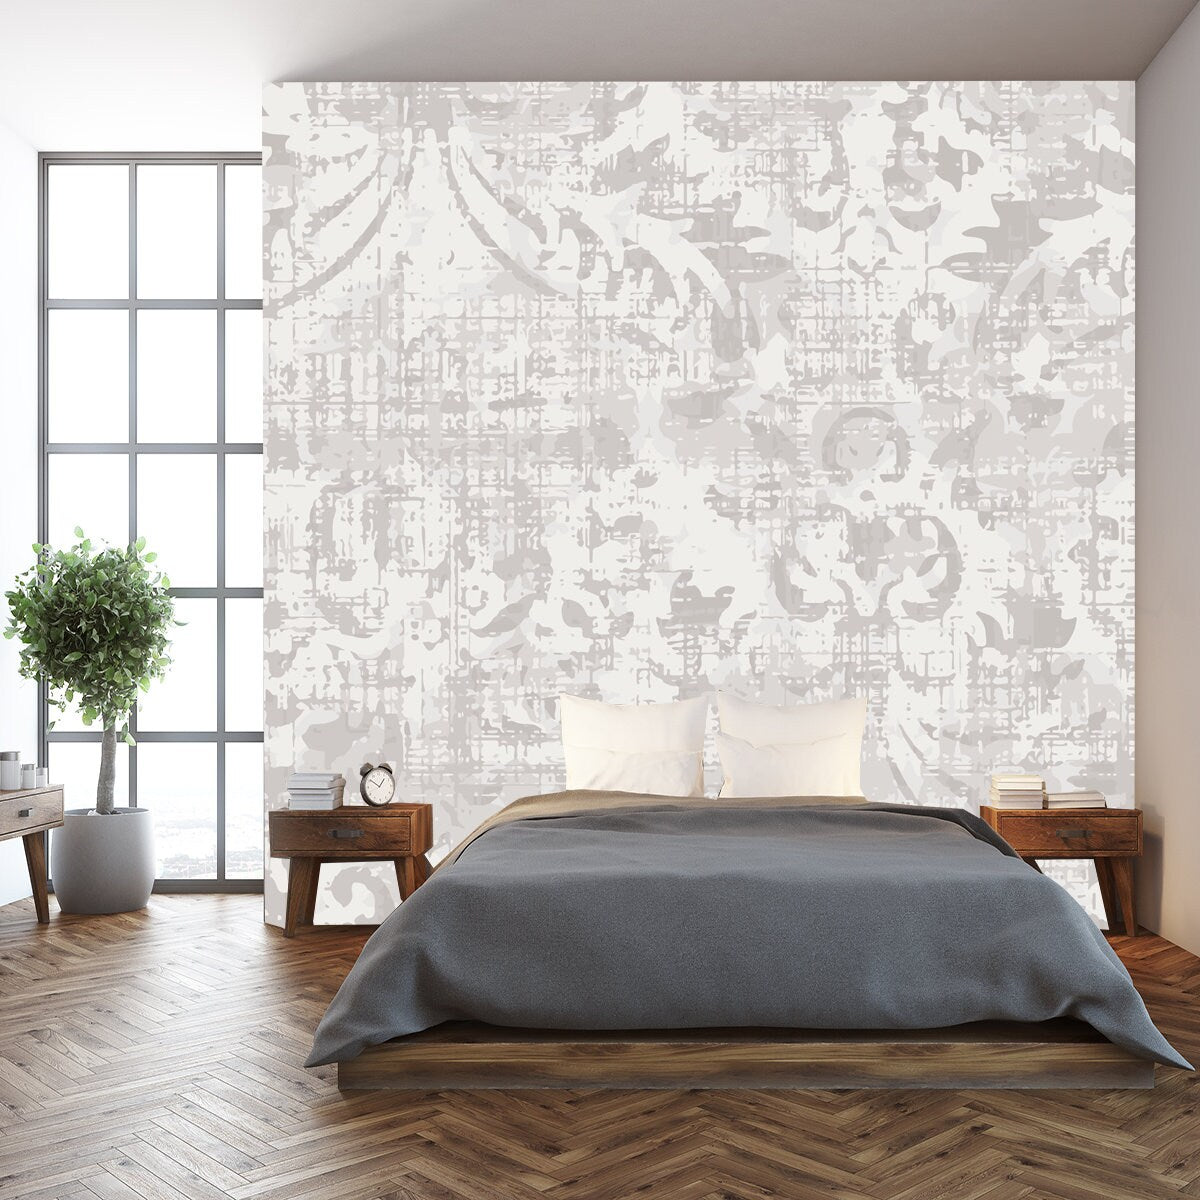 Abstract Texture or Grunge Floral. Colors are Blue and Beige Wallpaper Bedroom Mural